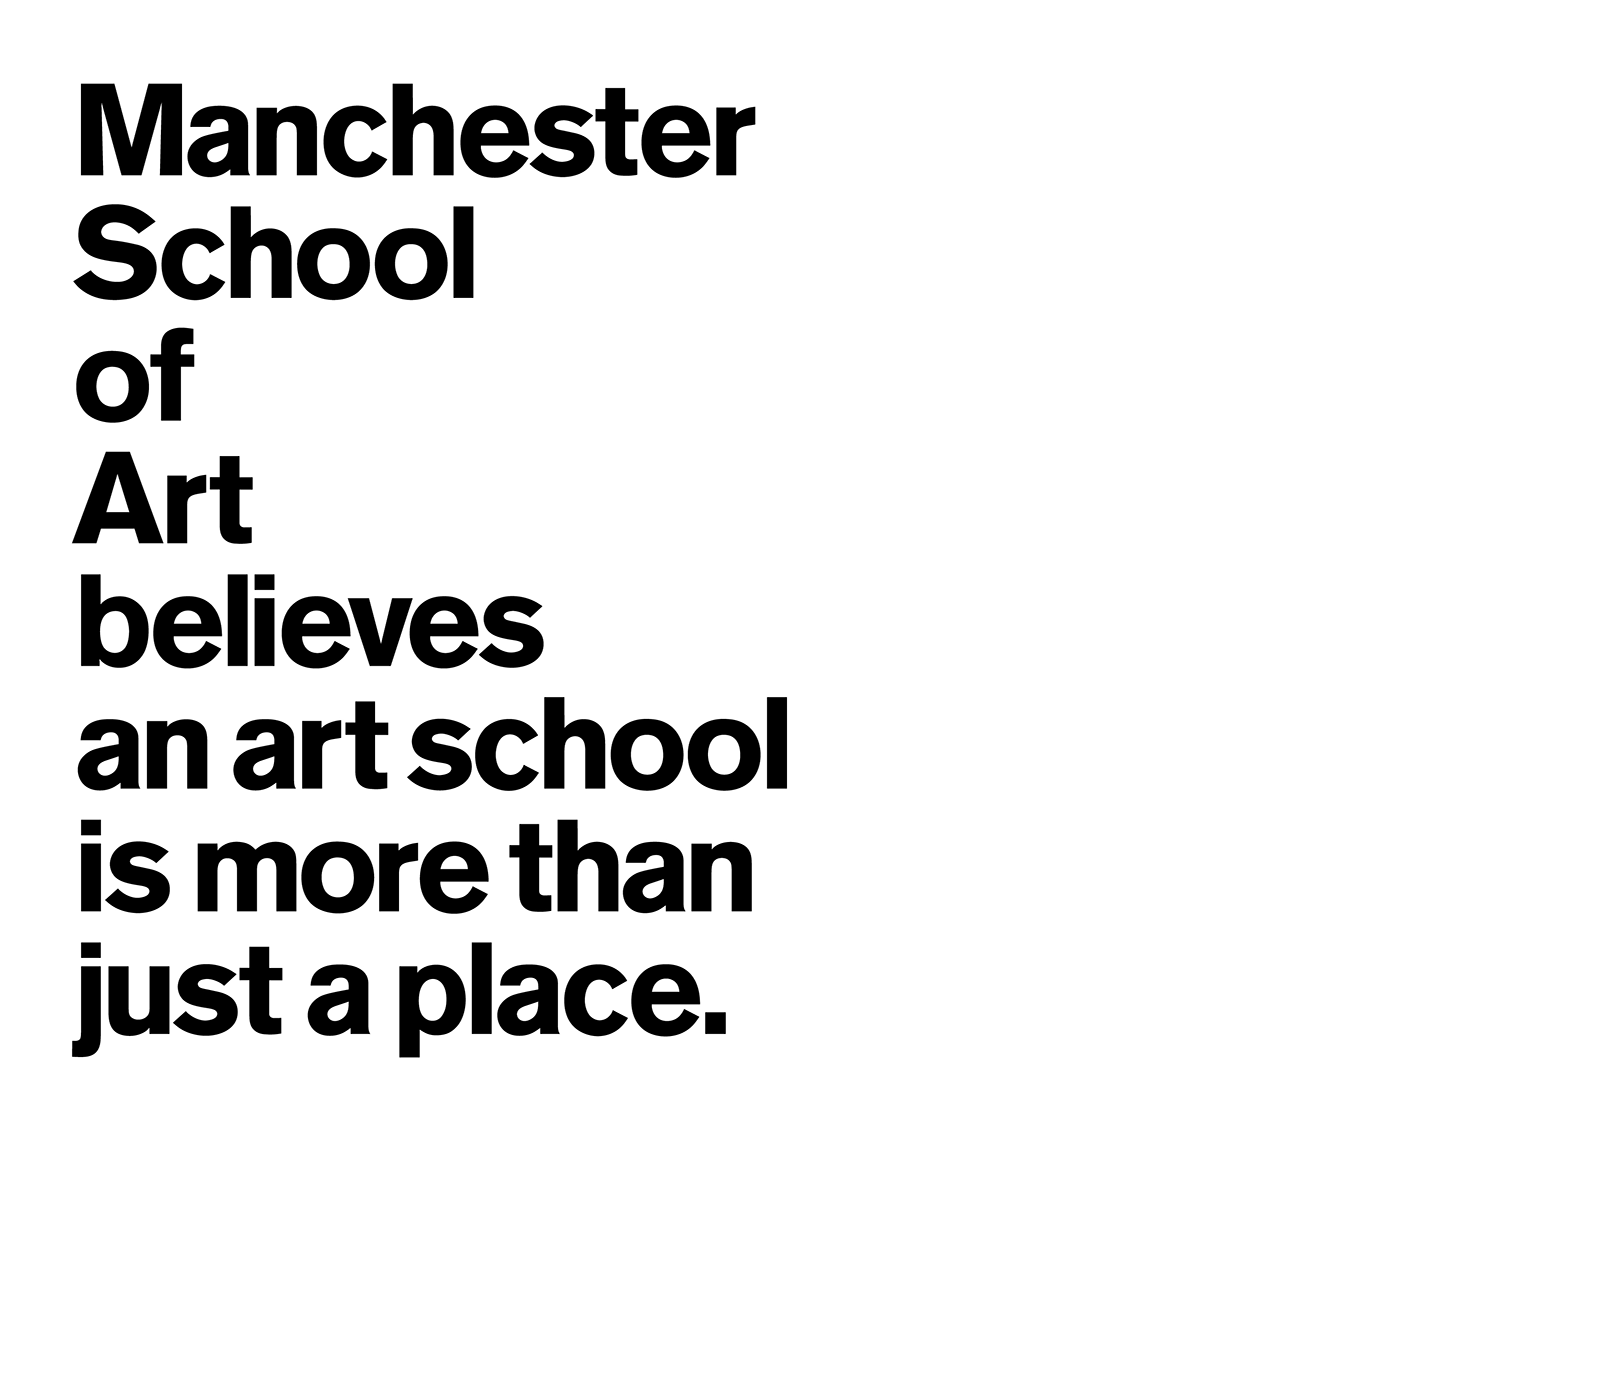 Manchester School of Art believes that an art school is more than a place.